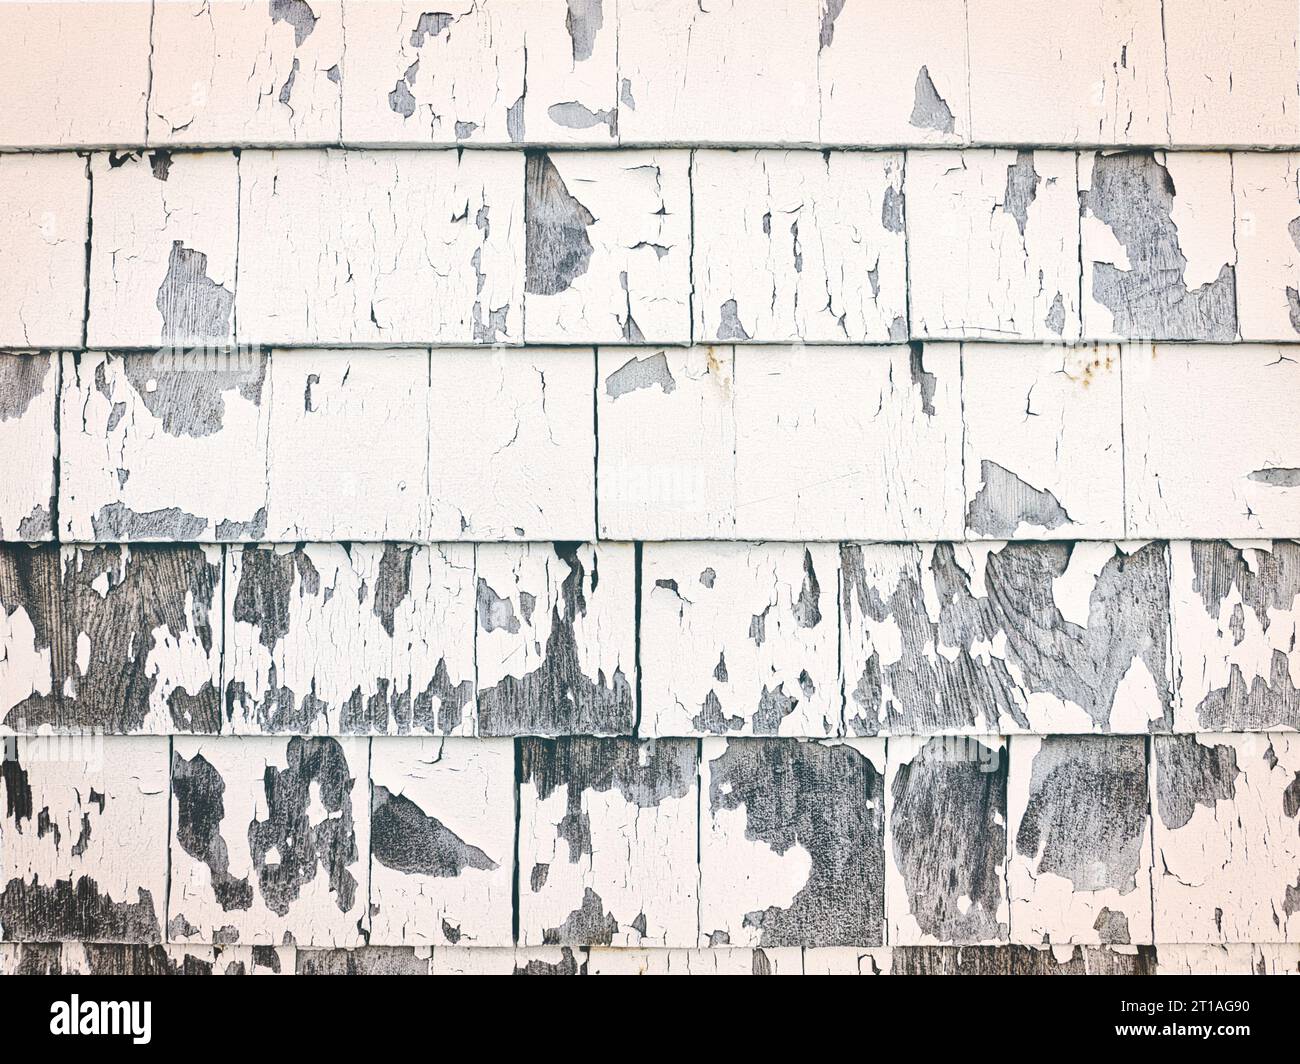 Close up texture detail showing peeling white paint against faded gray siding on old building in New England. Stock Photo